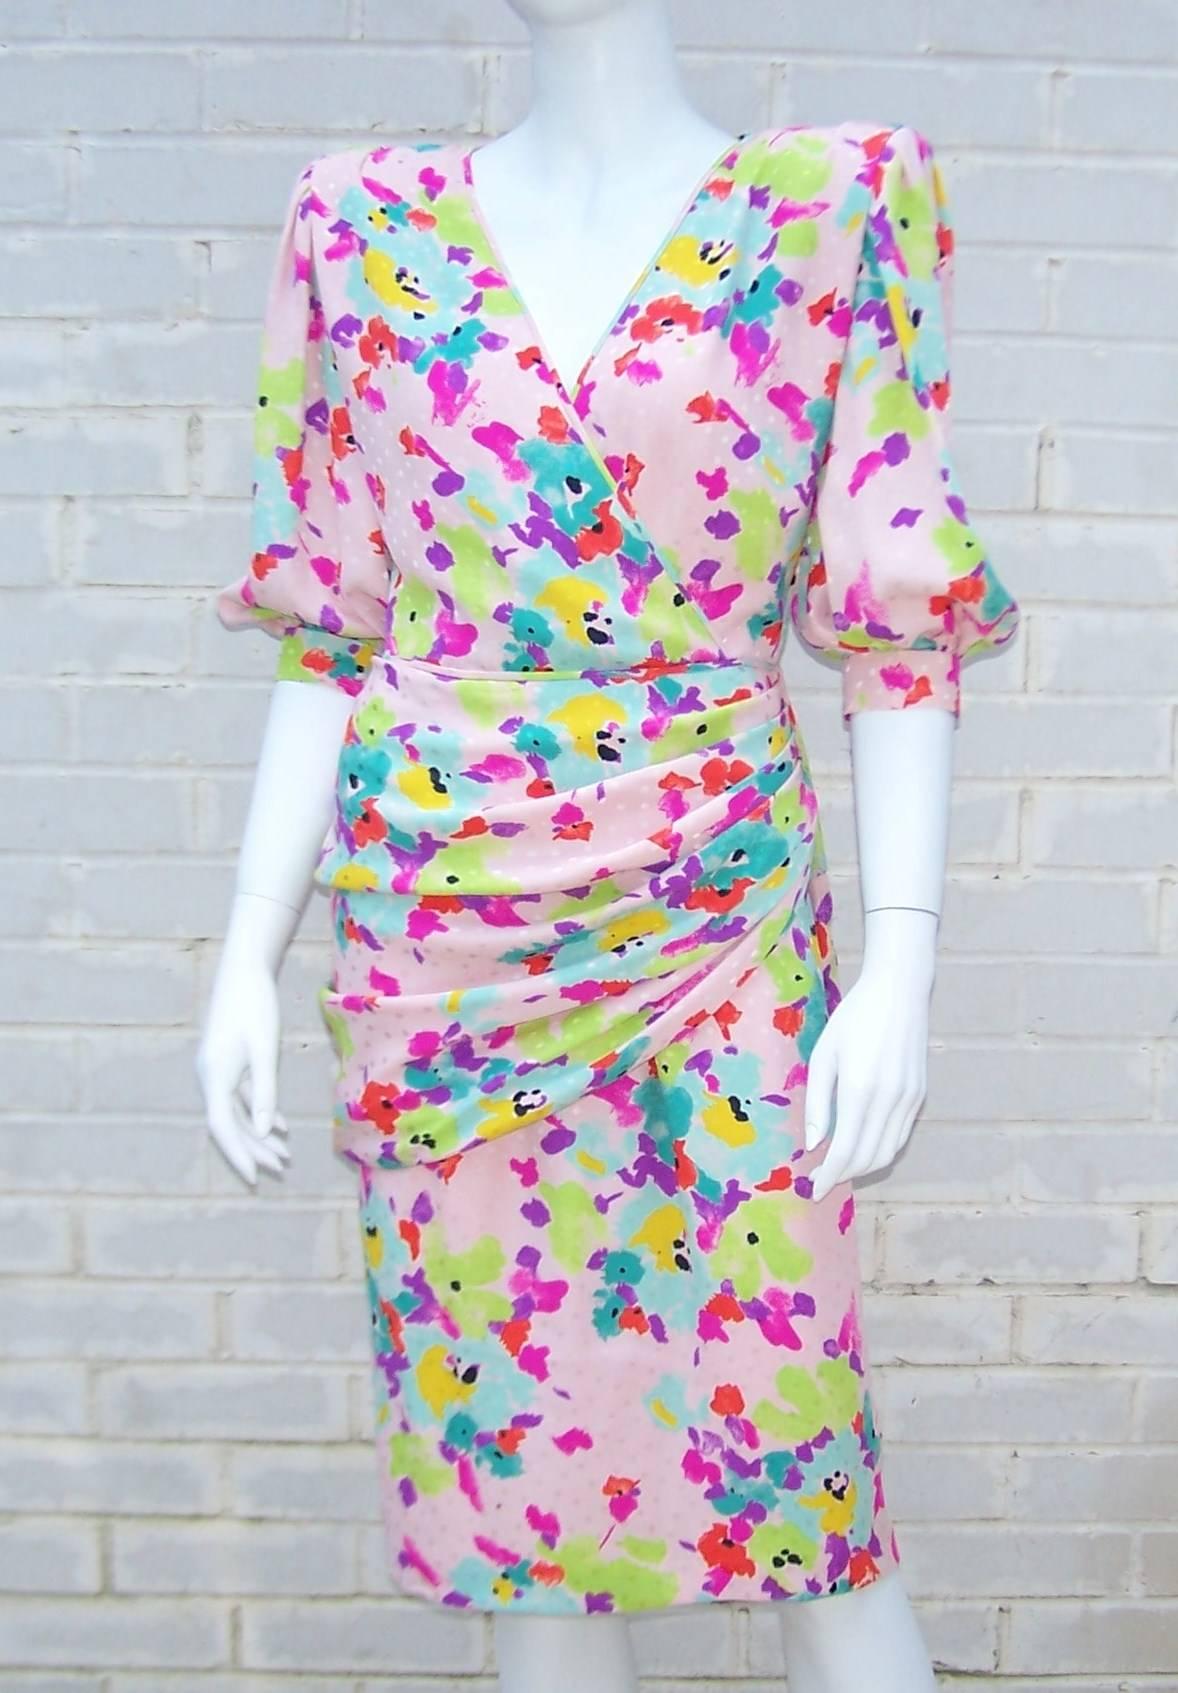 This 1980s Ungaro silk dress has a beautiful body hugging style.  The gorgeous jacquard floral fabric is draped and ruched at the hips with a hidden zipper at the side.  Shoulder pads add drama to the hourglass silhouette.  It is fully lined with a